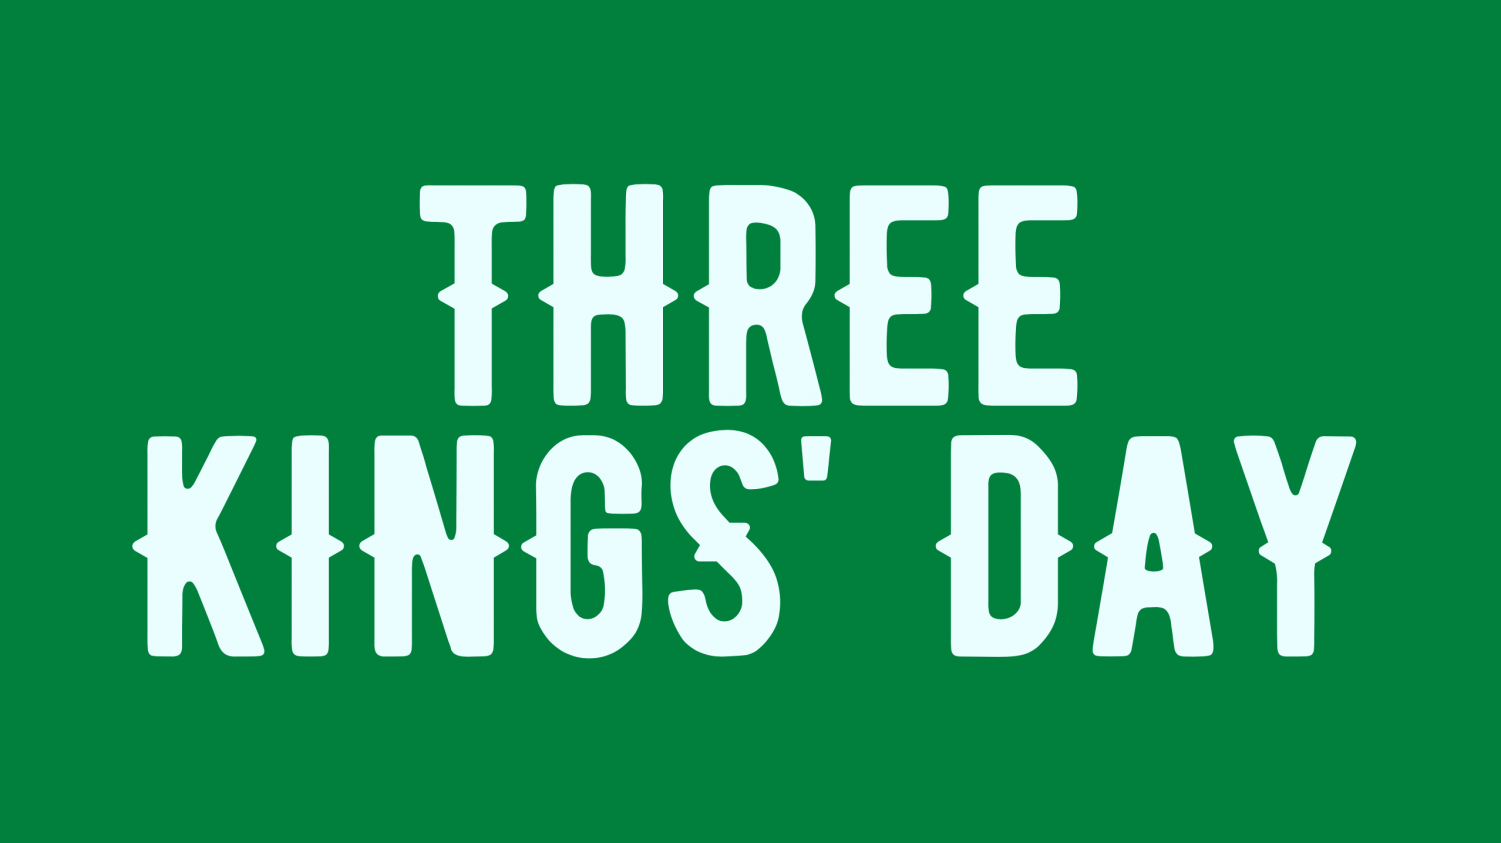 Celebrations of Three Kings’ Day